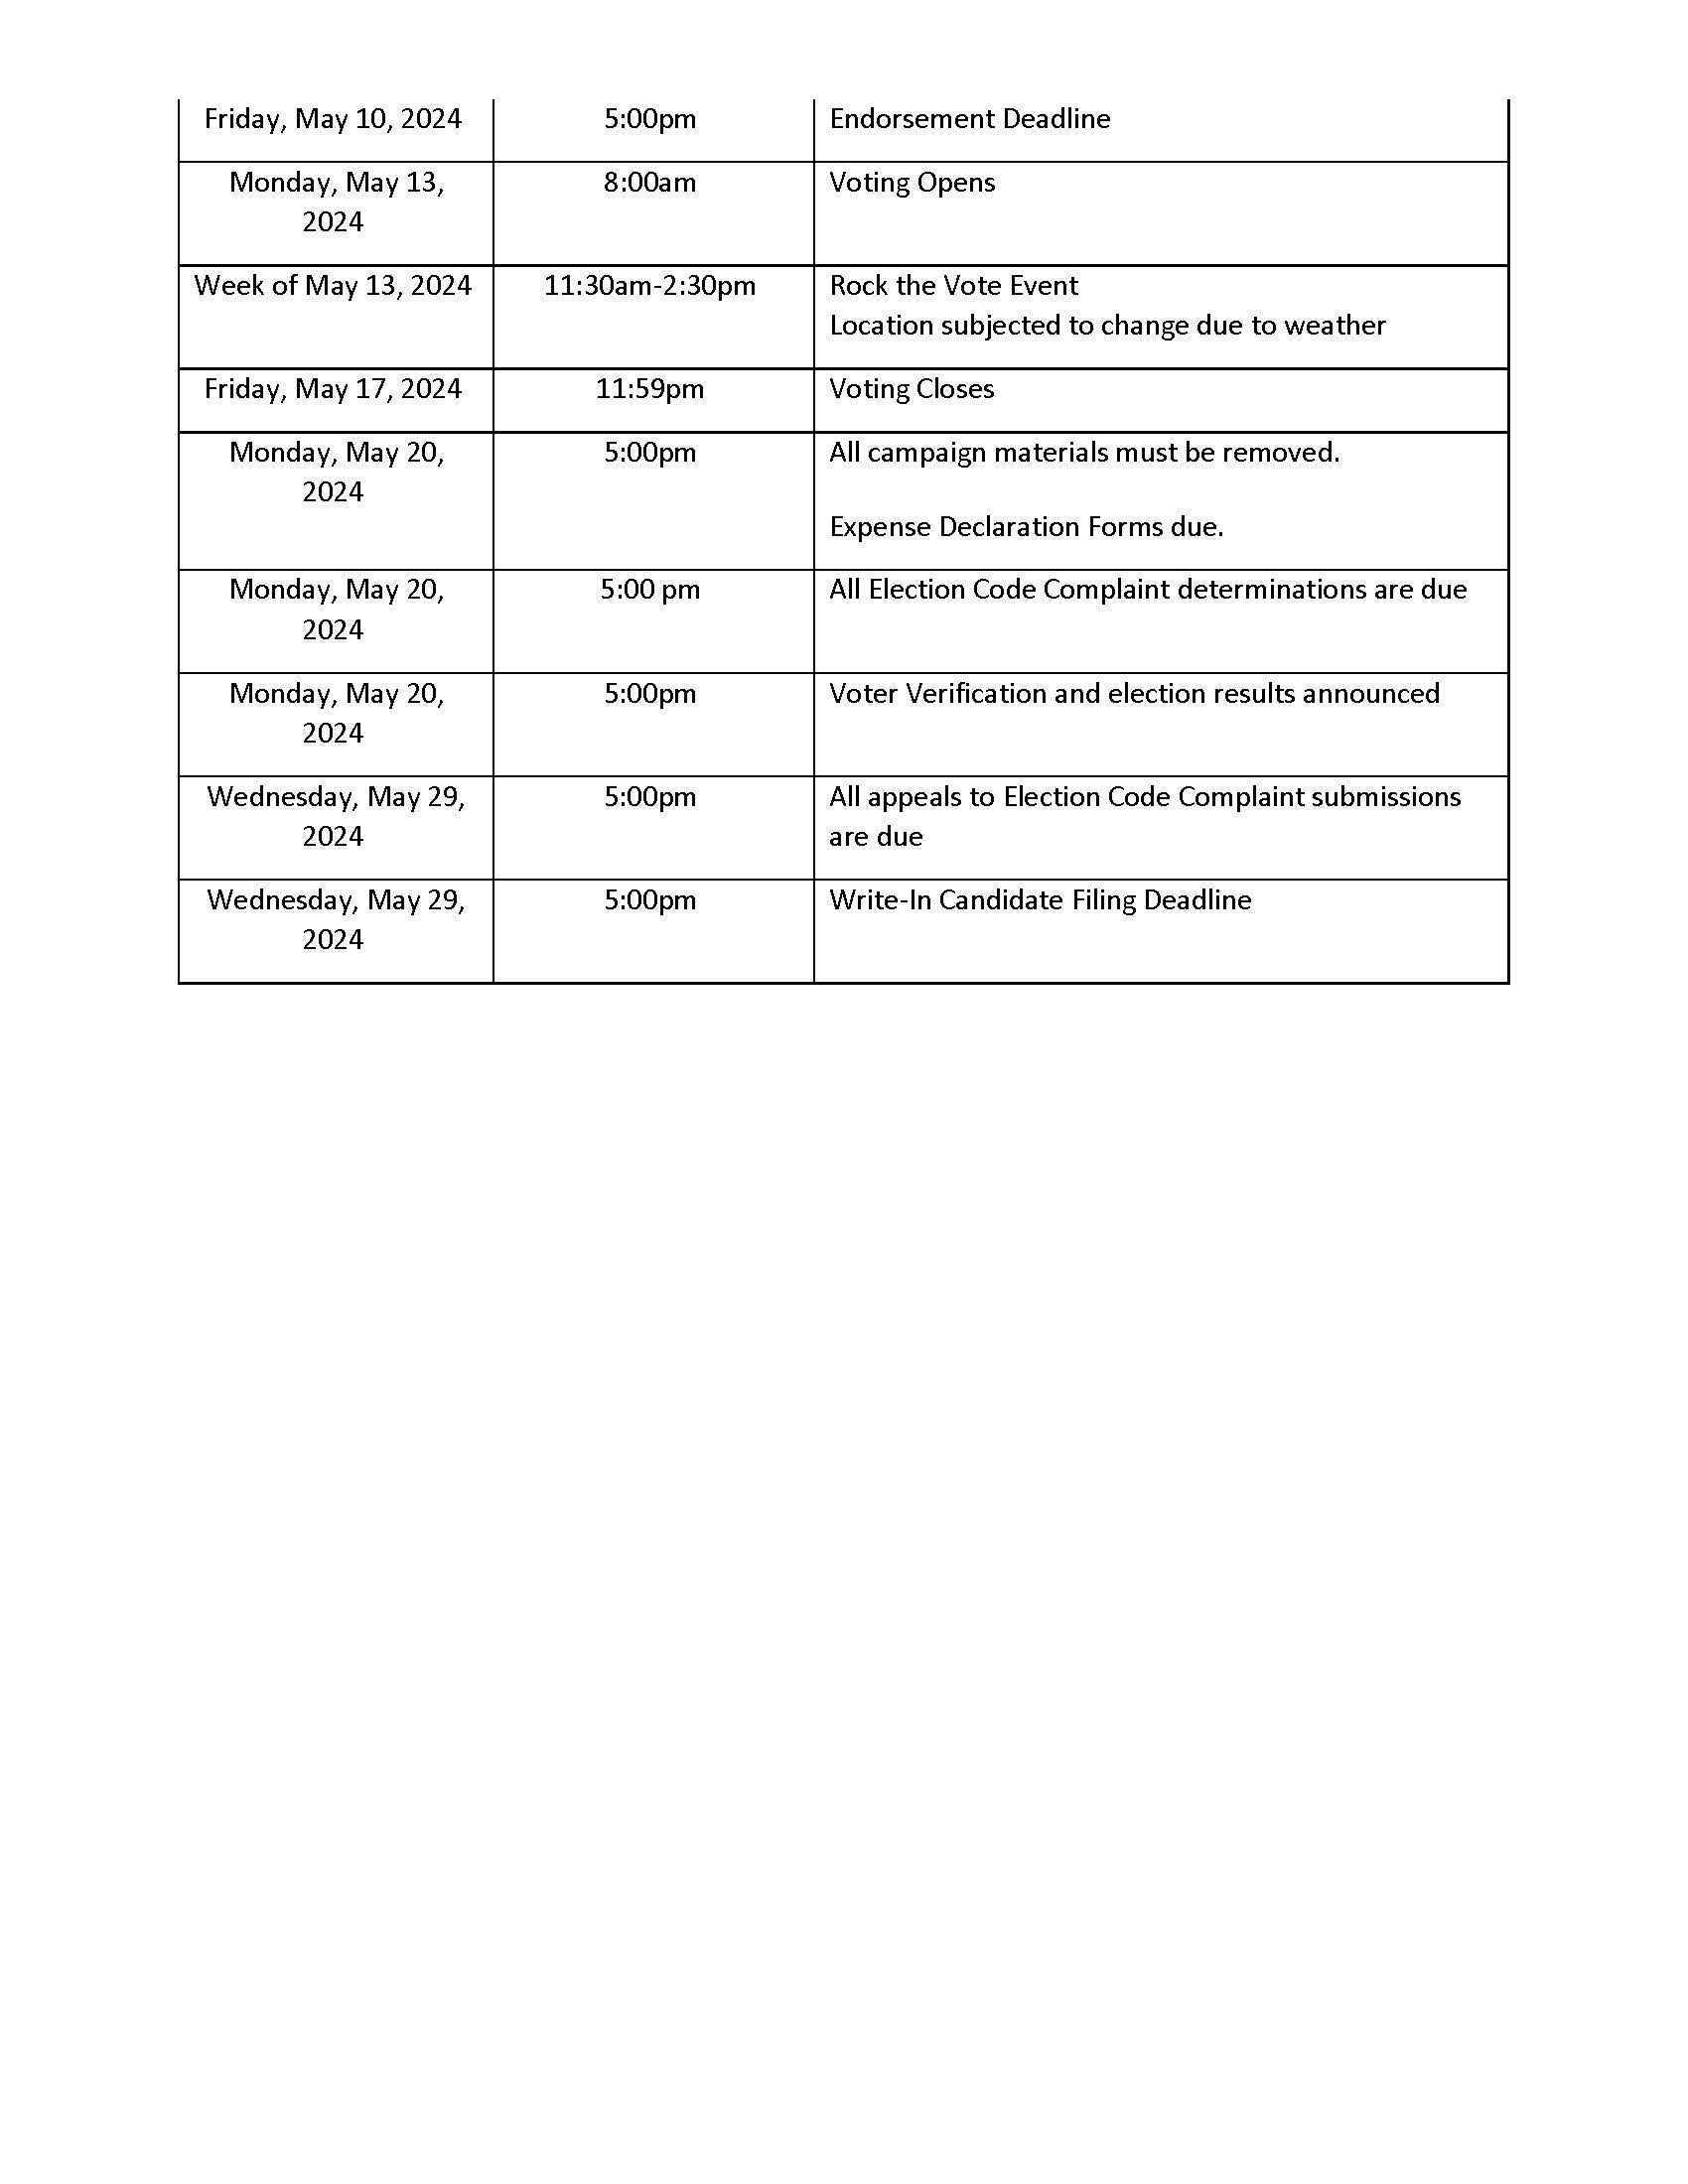 ASUWT Elections Calendar 2024 - Page 2